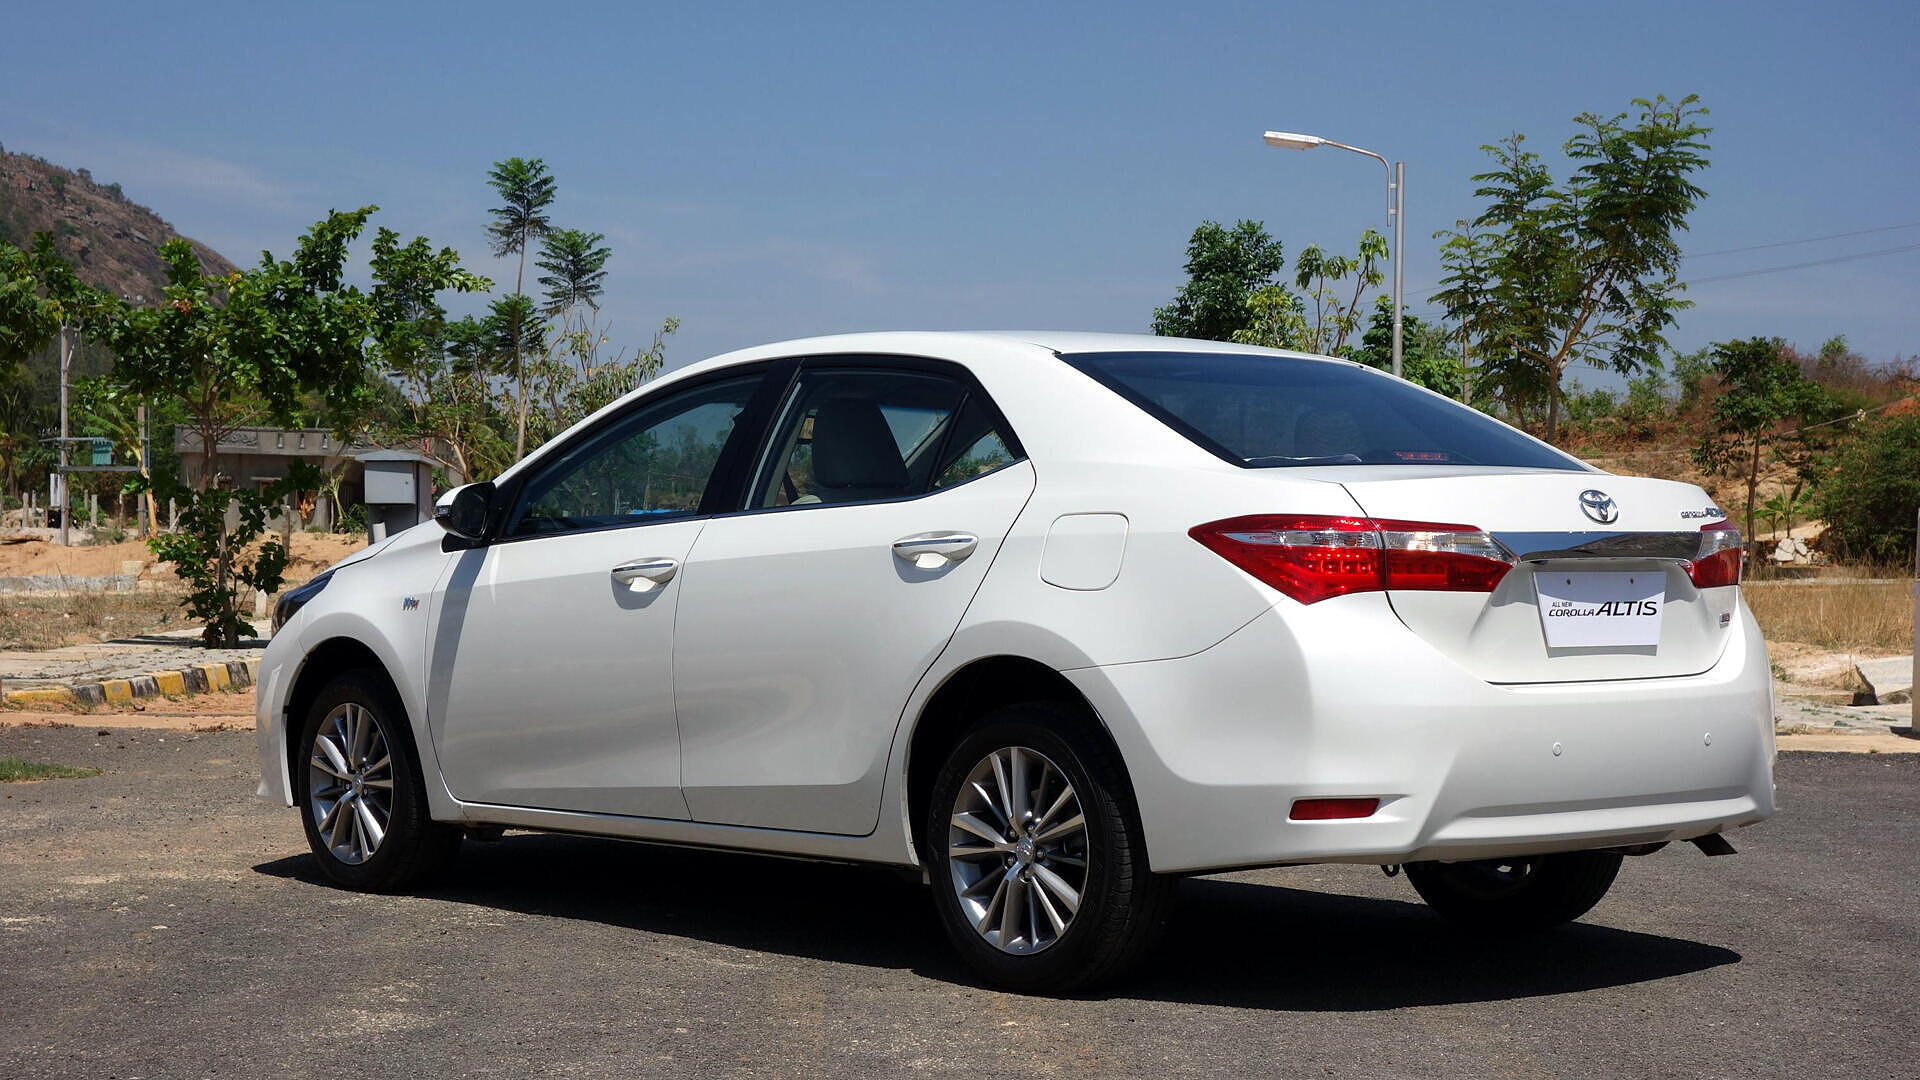 Toyota Corolla Altis 2014 2017 Images Interior Exterior Photo Gallery 50 Images Carwale